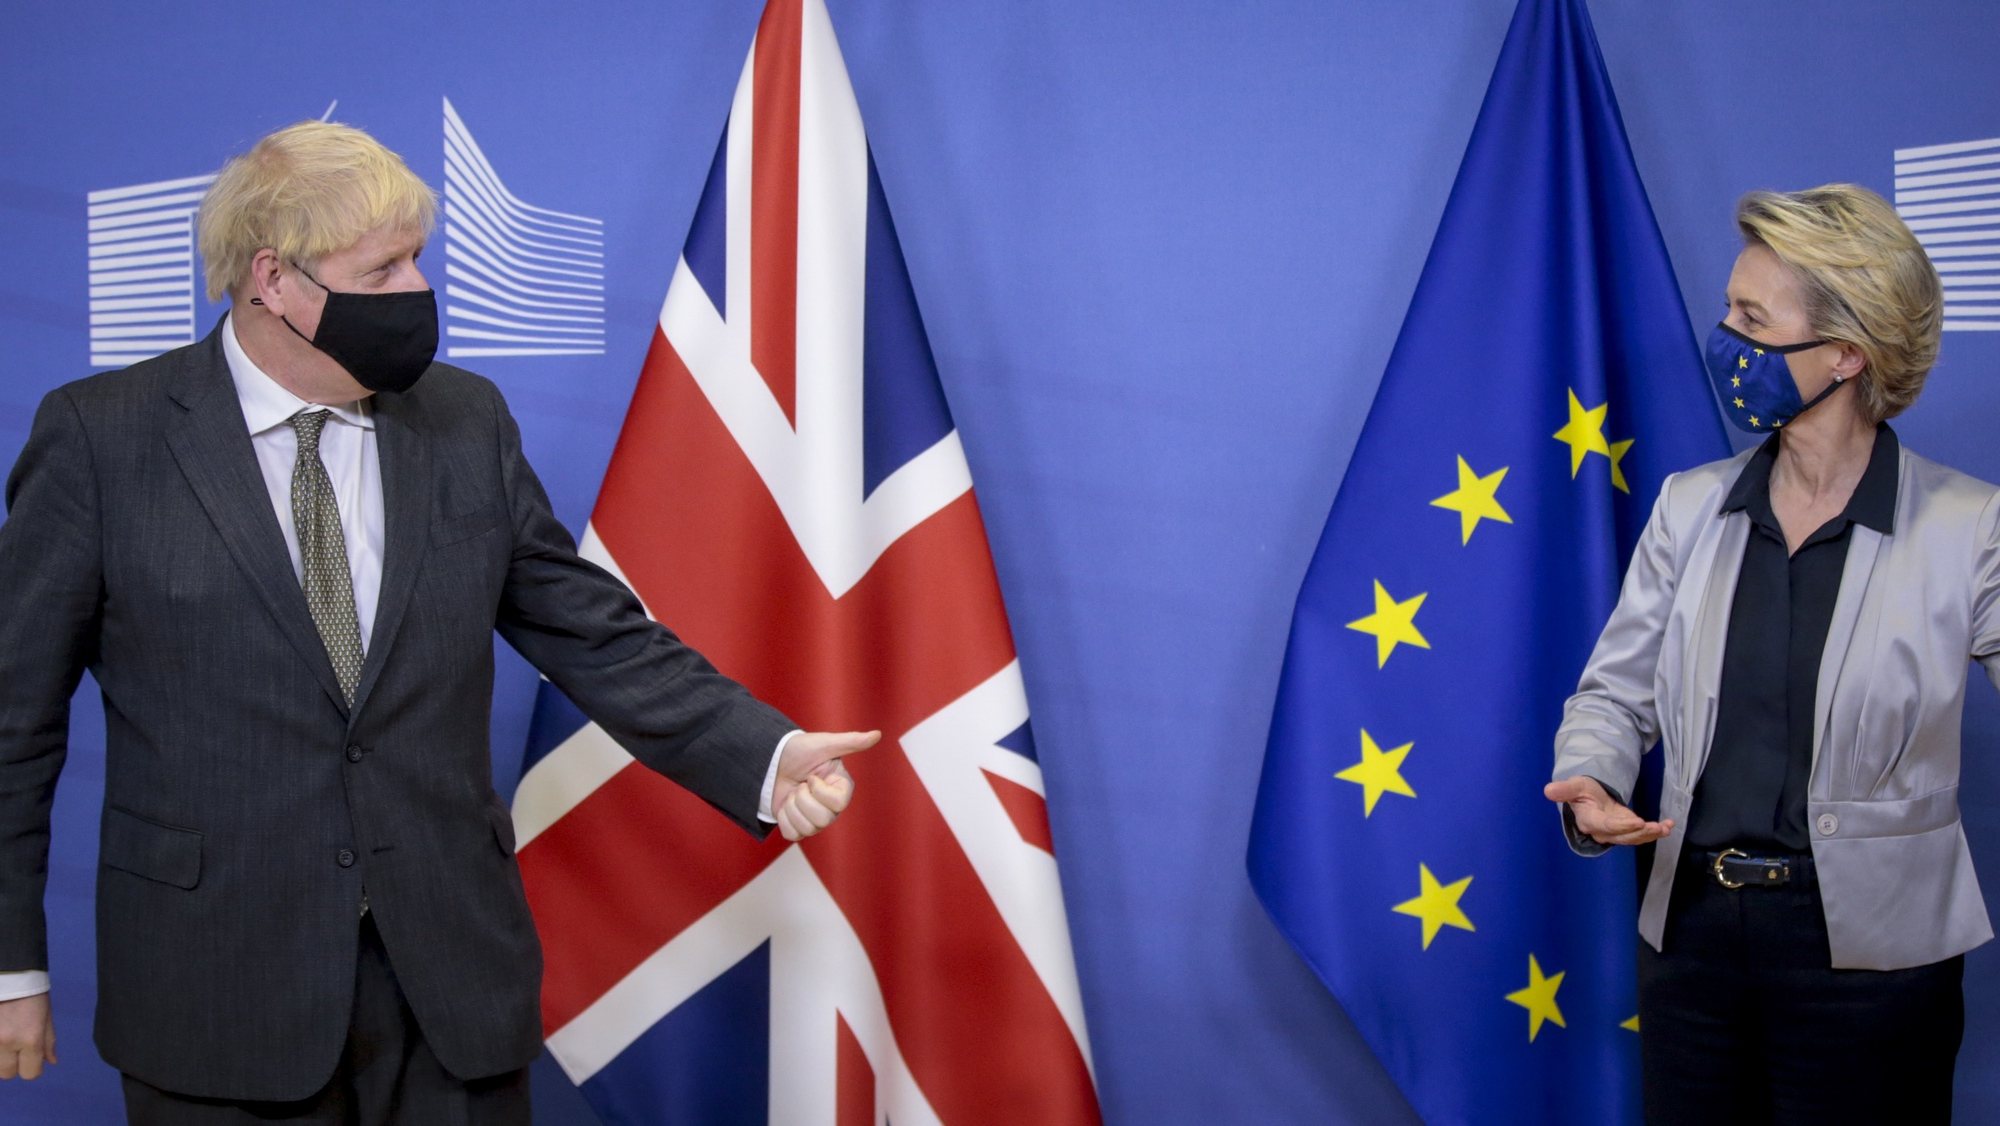 epa08873143 Britain&#039;s Prime Minister Boris Johnson (L) gestures towards European Commission President Ursula von der Leyen (R) welcoming him prior to post-Brexit trade deal talks, in Brussels, Belgium, 09 December 2020. A negotiations phase of eleven months that started on 31 January 2020 following the UK&#039;s exit from the EU ends on 31 December 2020.  EPA/OLIVIER HOSLET / POOL